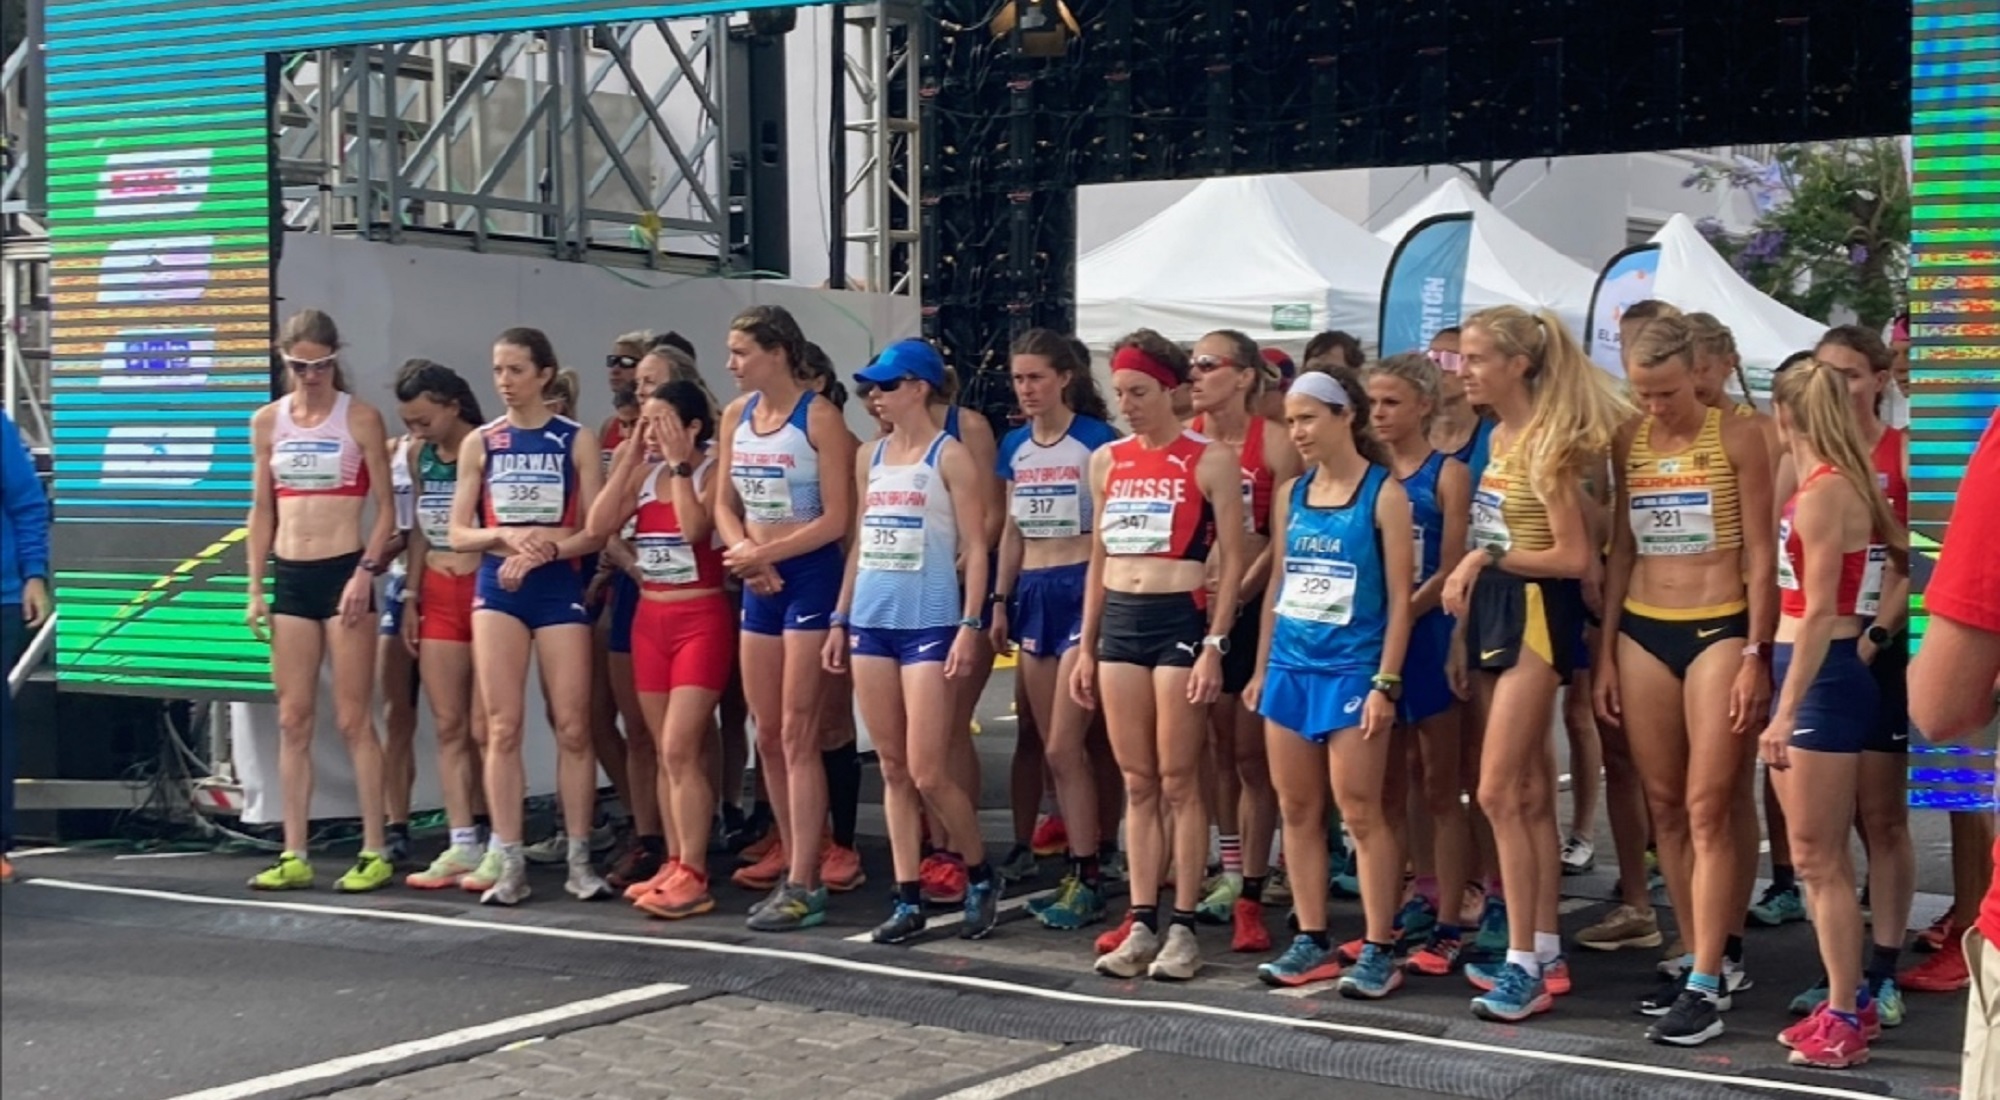 The women's start in the European Off-Road Championships